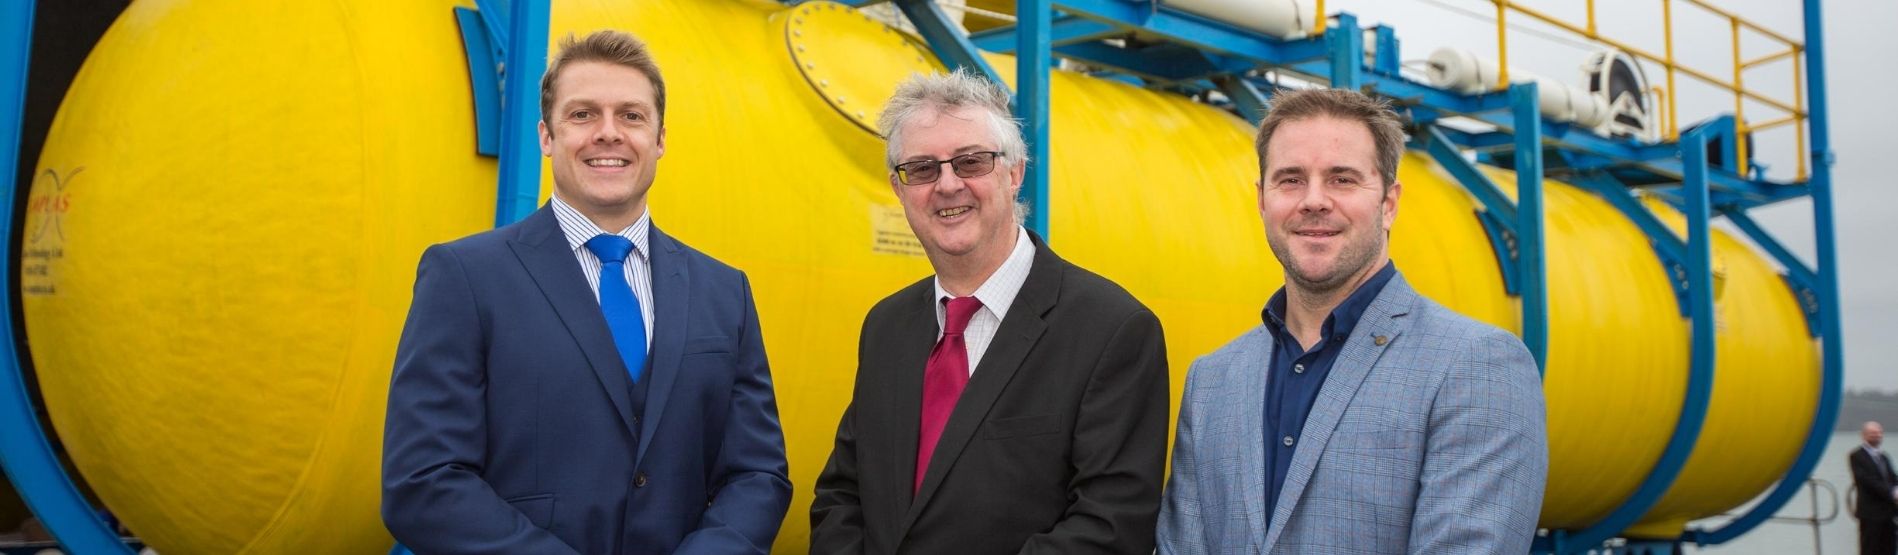 Dr Gareth Stockman, Mark Drakeford (First Minister of Wales) and Dr Graham Foster standing in front of the Wave Sub.